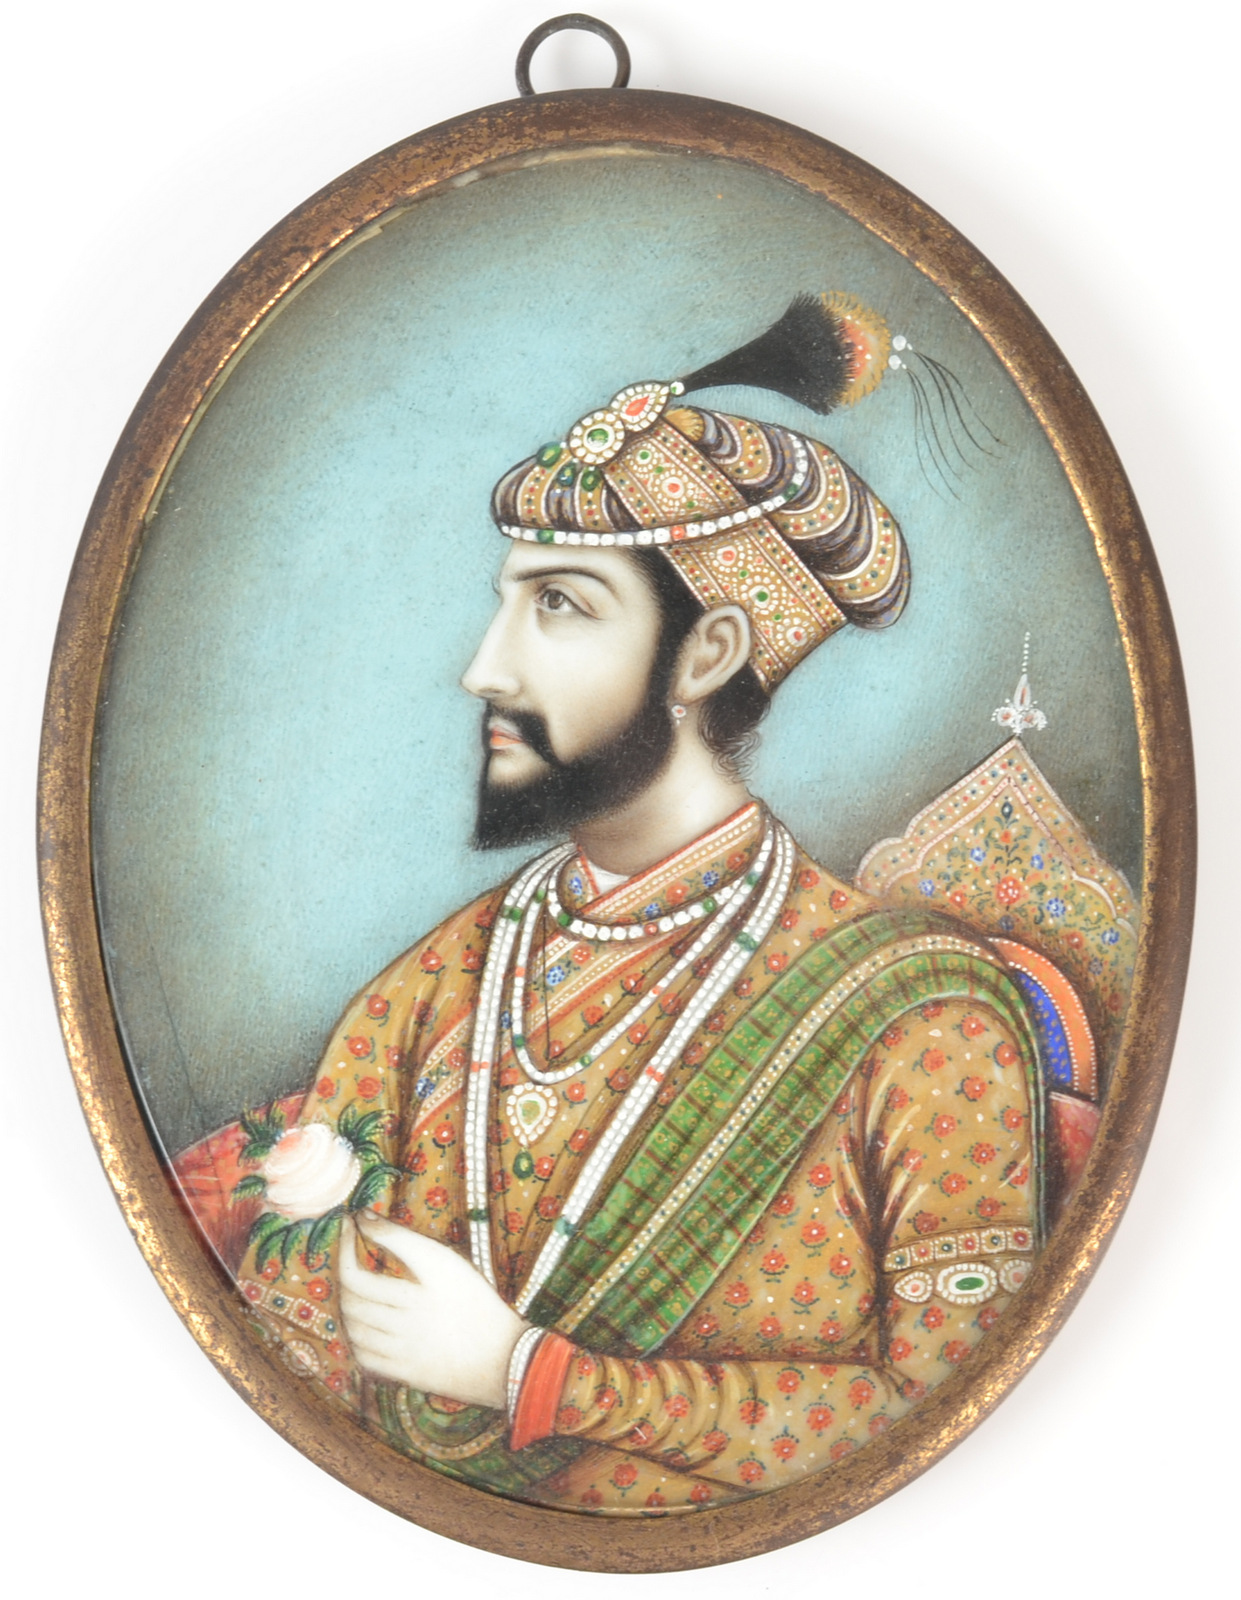 A 19th century Indian painted miniature of Emperor Shah Jahan, length 10.1cm, width 8.3cm.